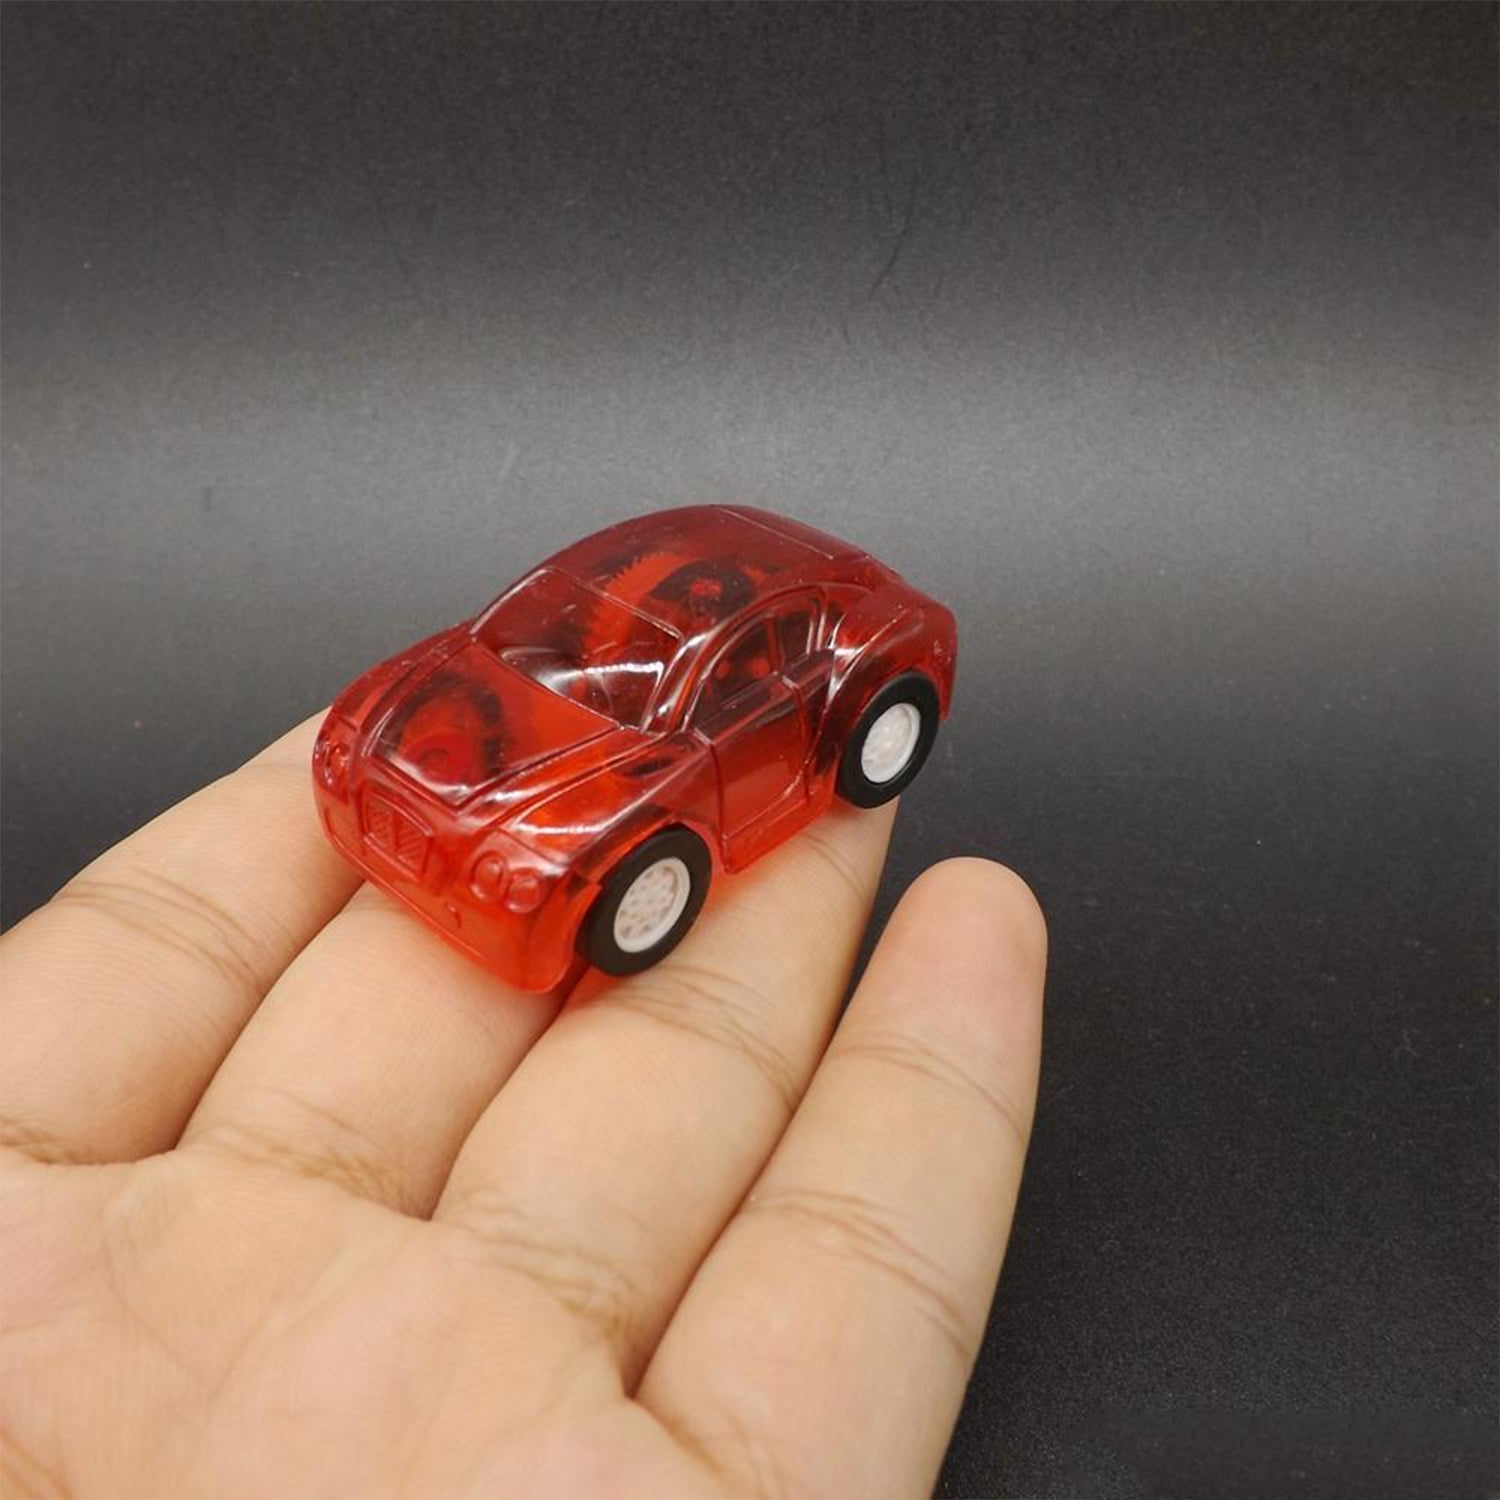 8074 Mini Pull Back Car used widely by kids and children’s for playing and enjoying purposes in all kinds of household and official places. DeoDap